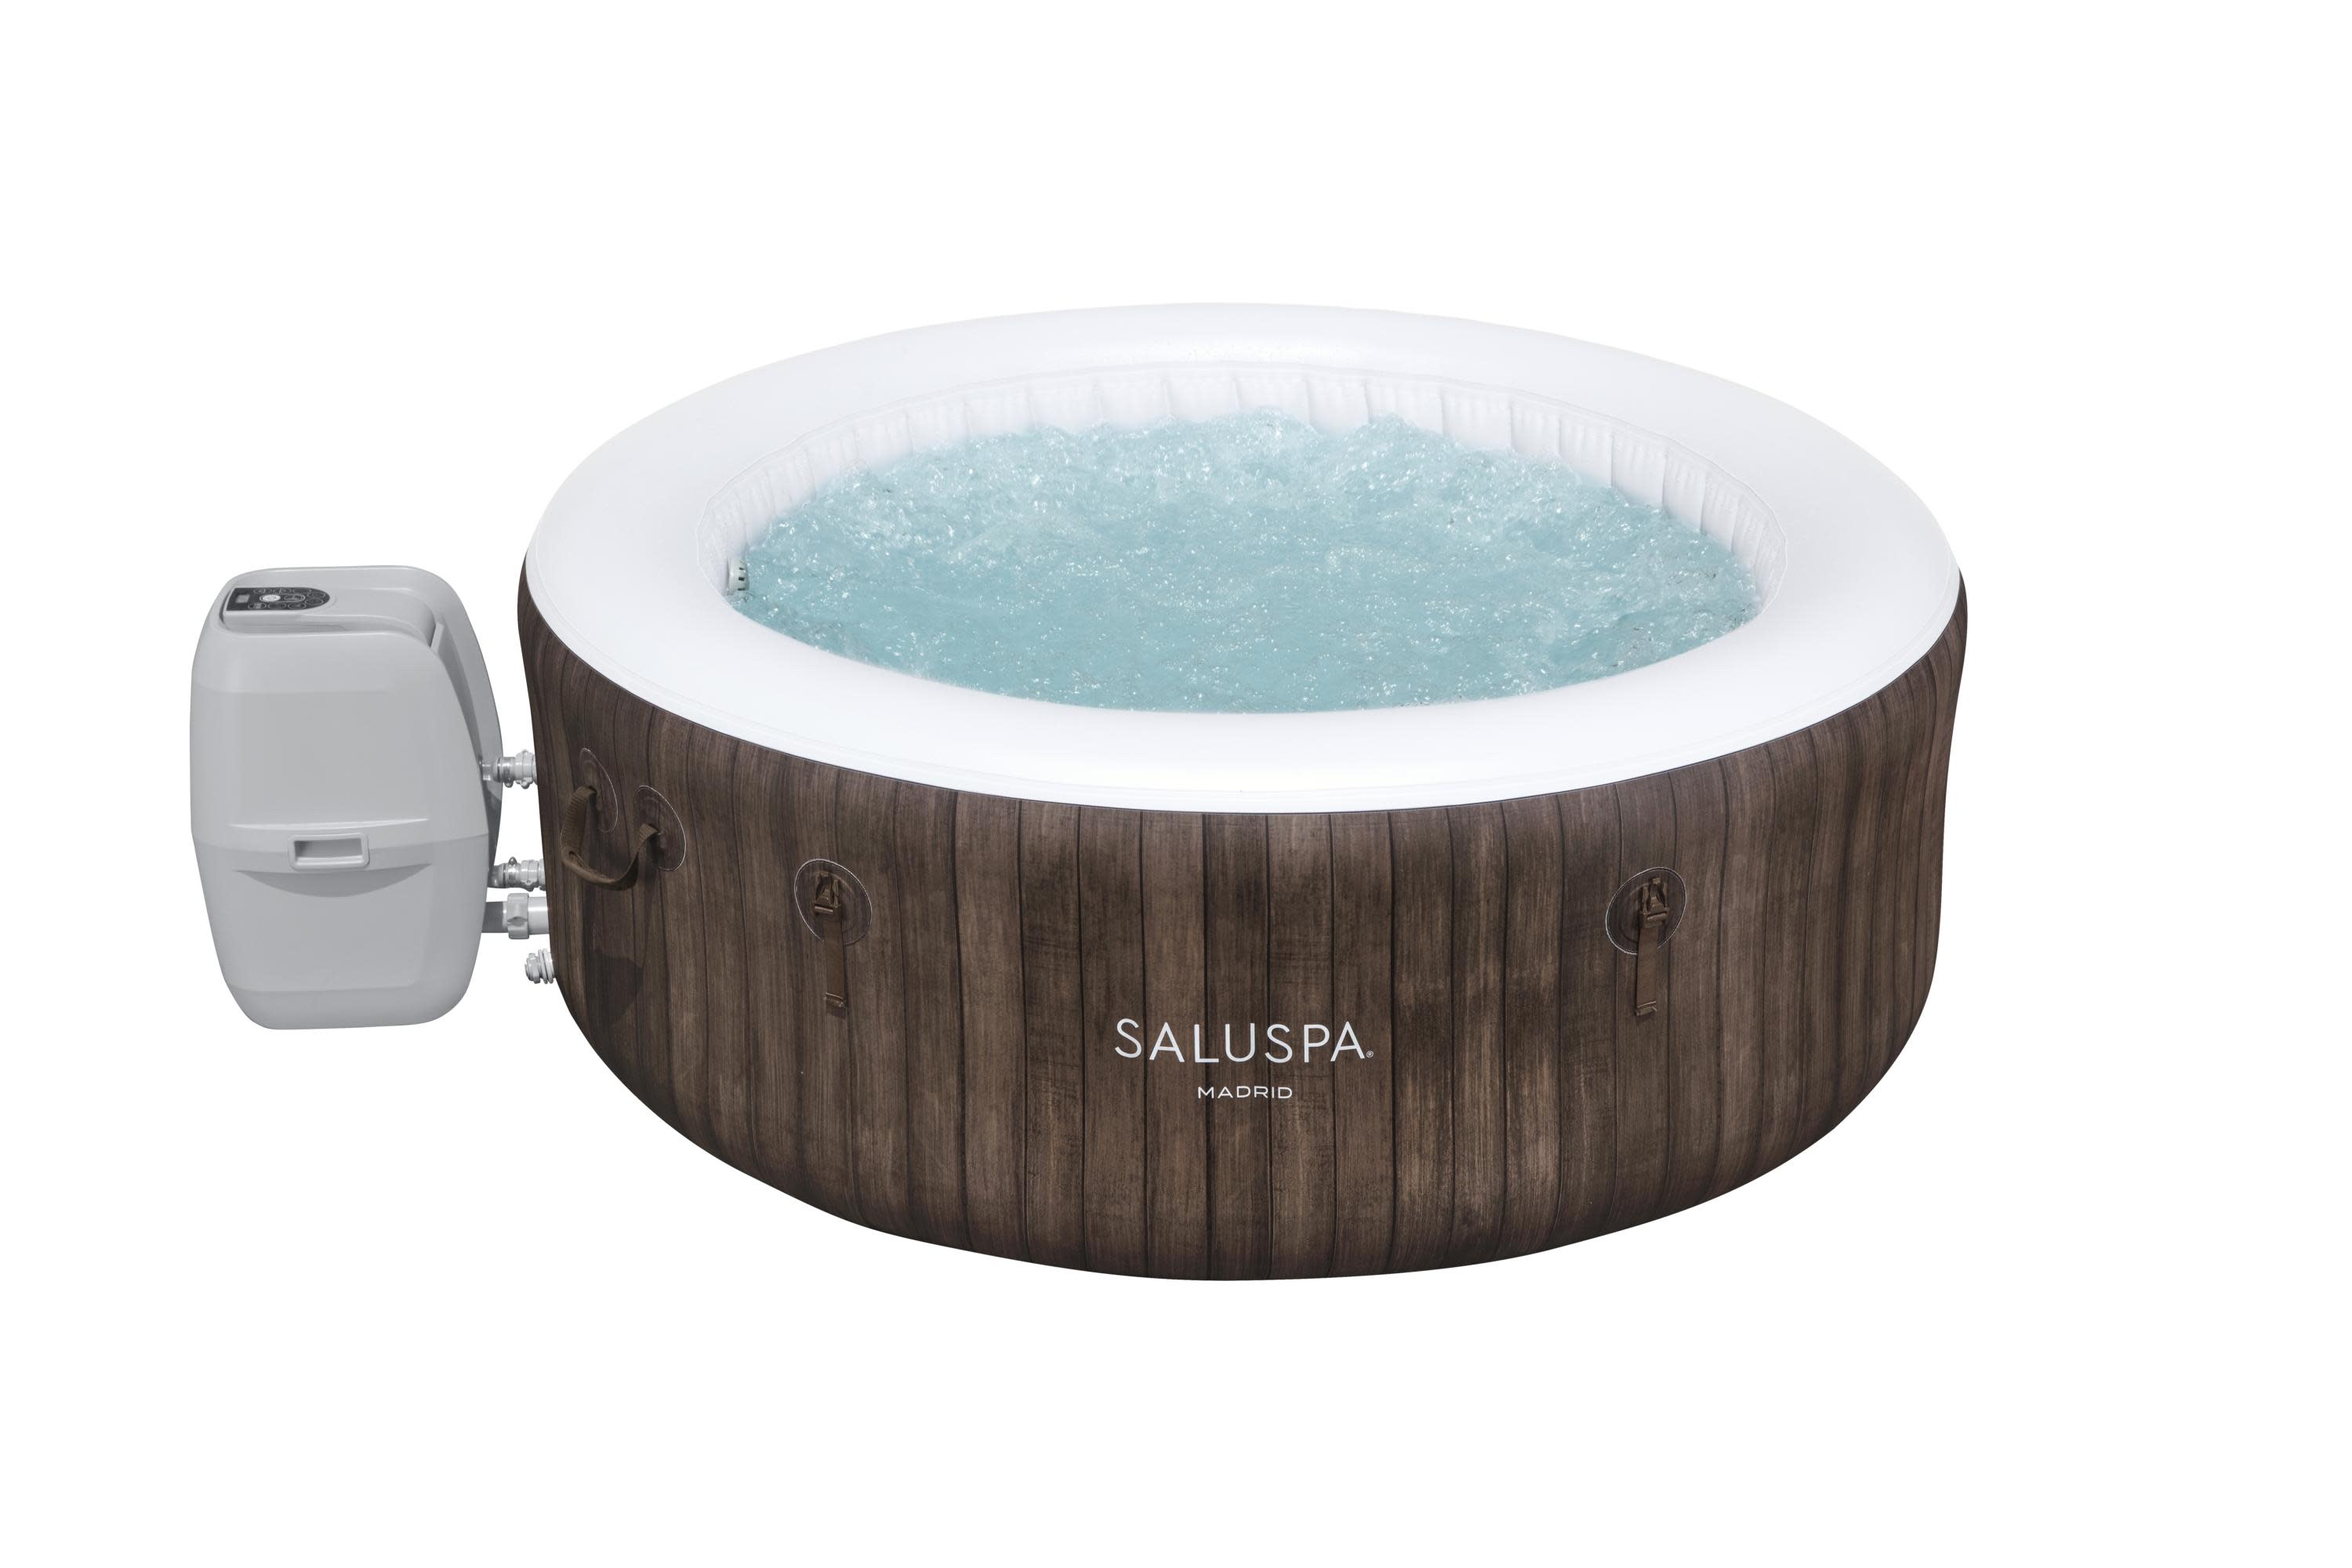 Bestway SaluSpa 71 in. x 26 in. Madrid 177 Gal Inflatable Hot Tub, 104˚F Max Temperature - image 1 of 9